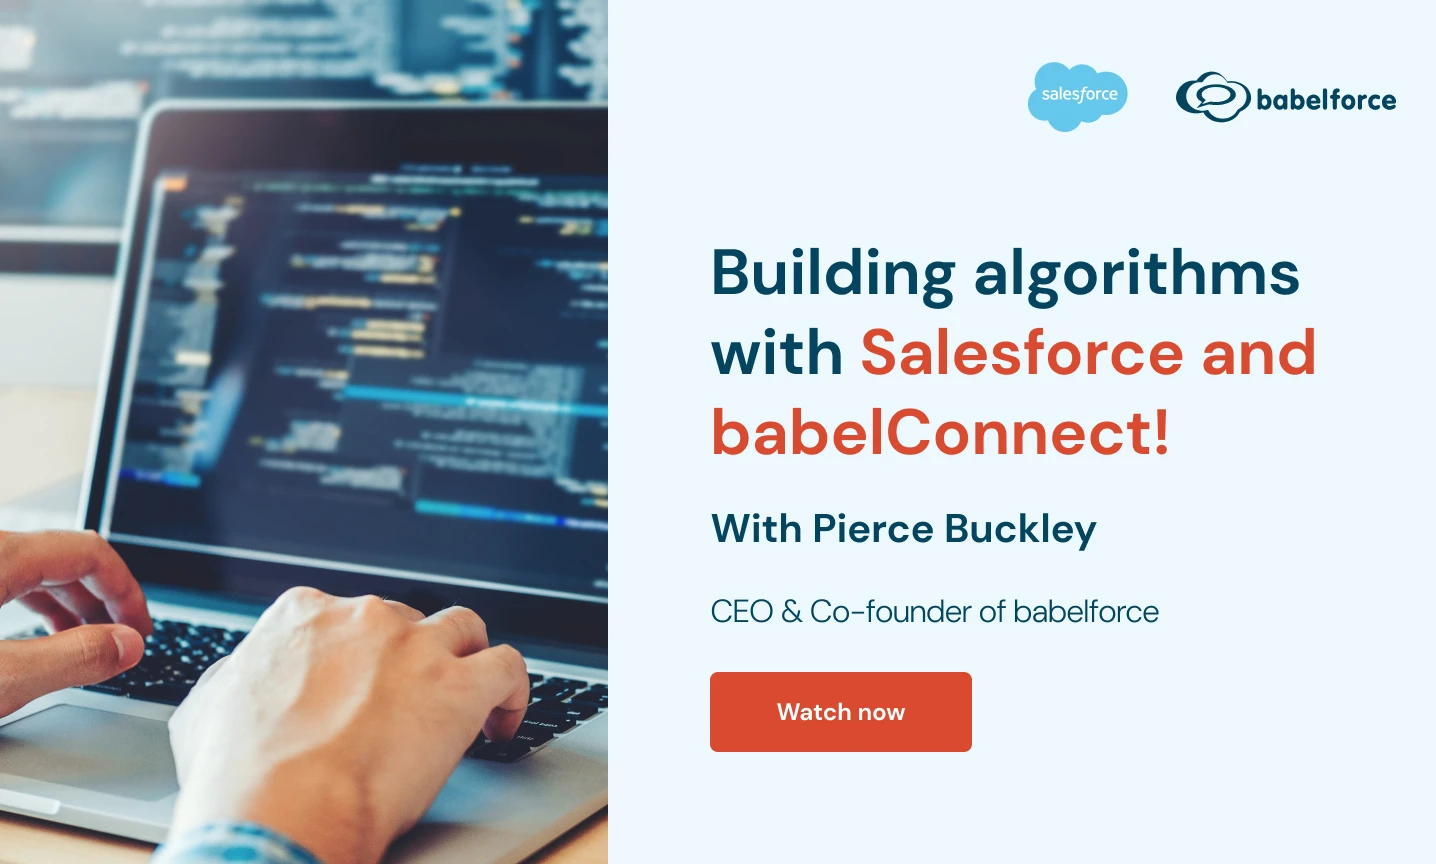 Building algorithms with Salesforce and babelConnect!